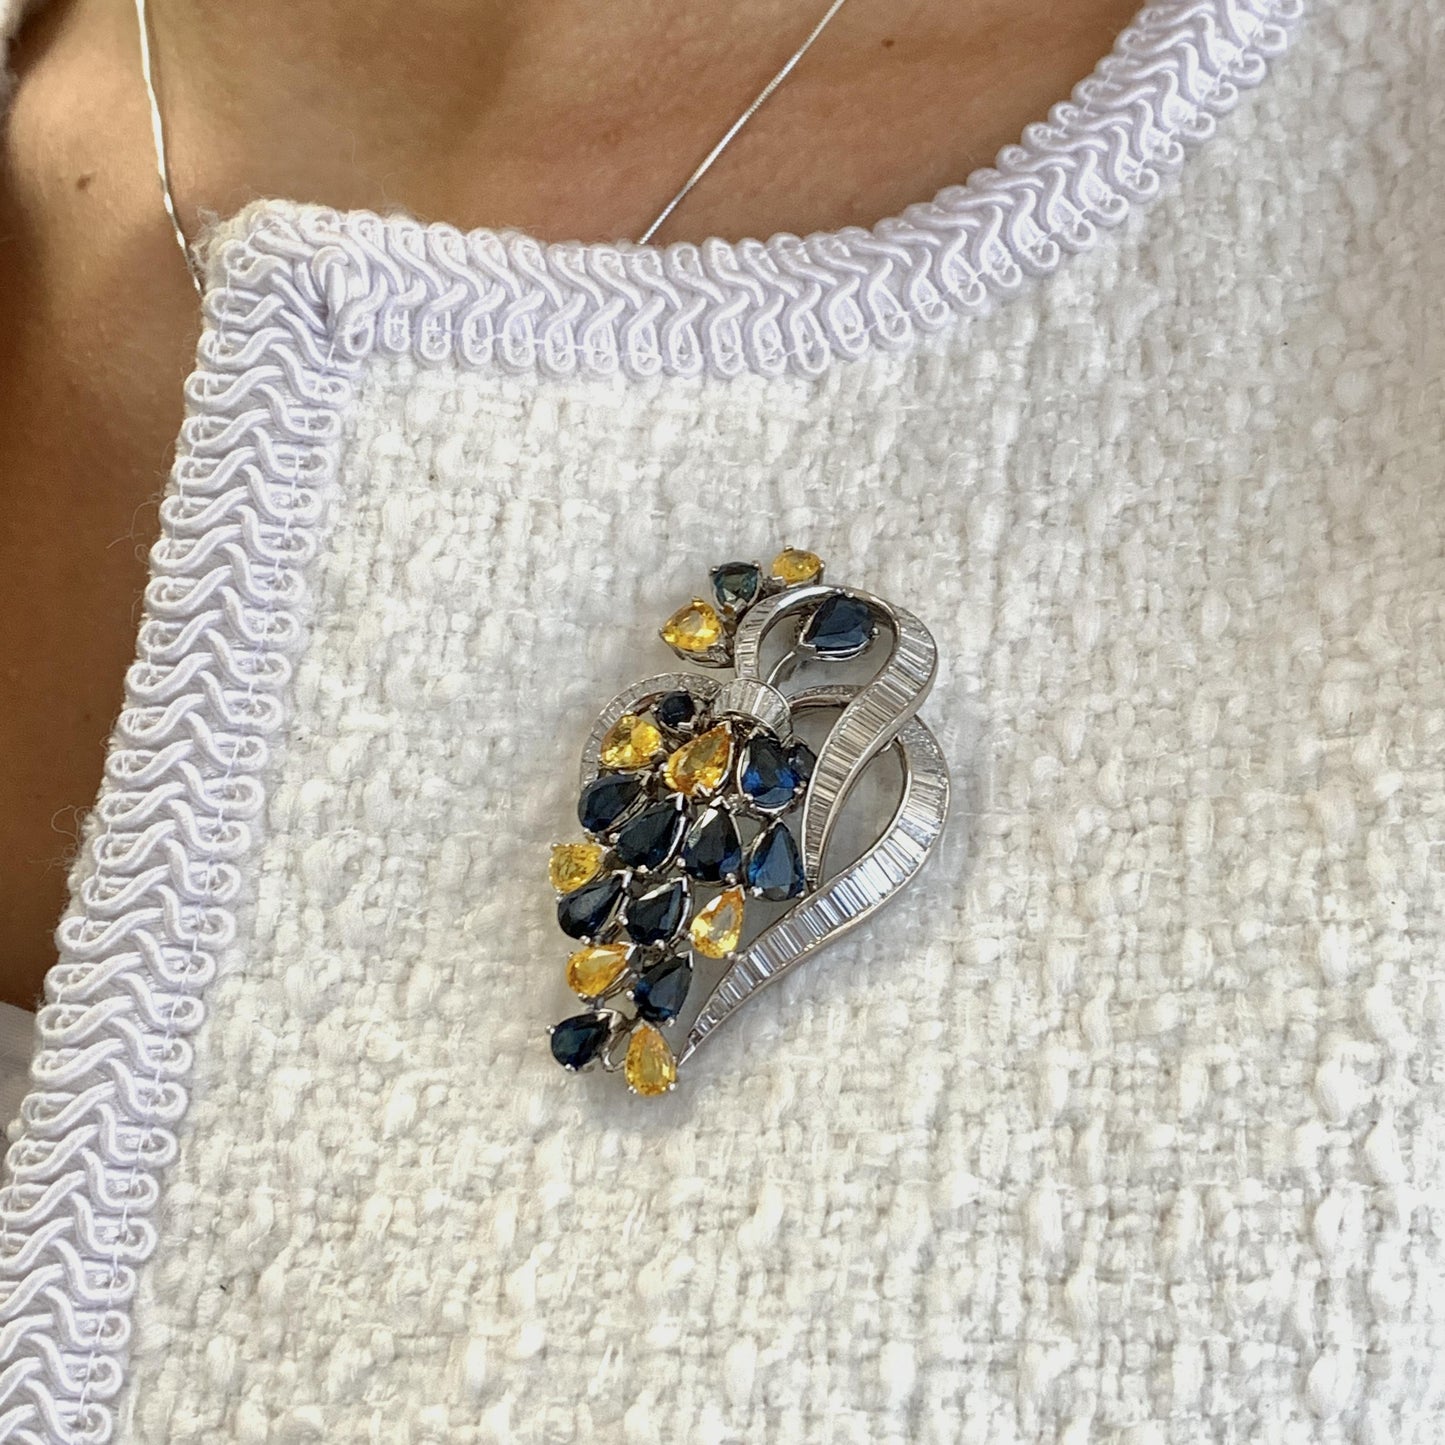 15.08 cttw. Blue & Yellow Sapphires and White Baguettes Grape Brunch Brooch